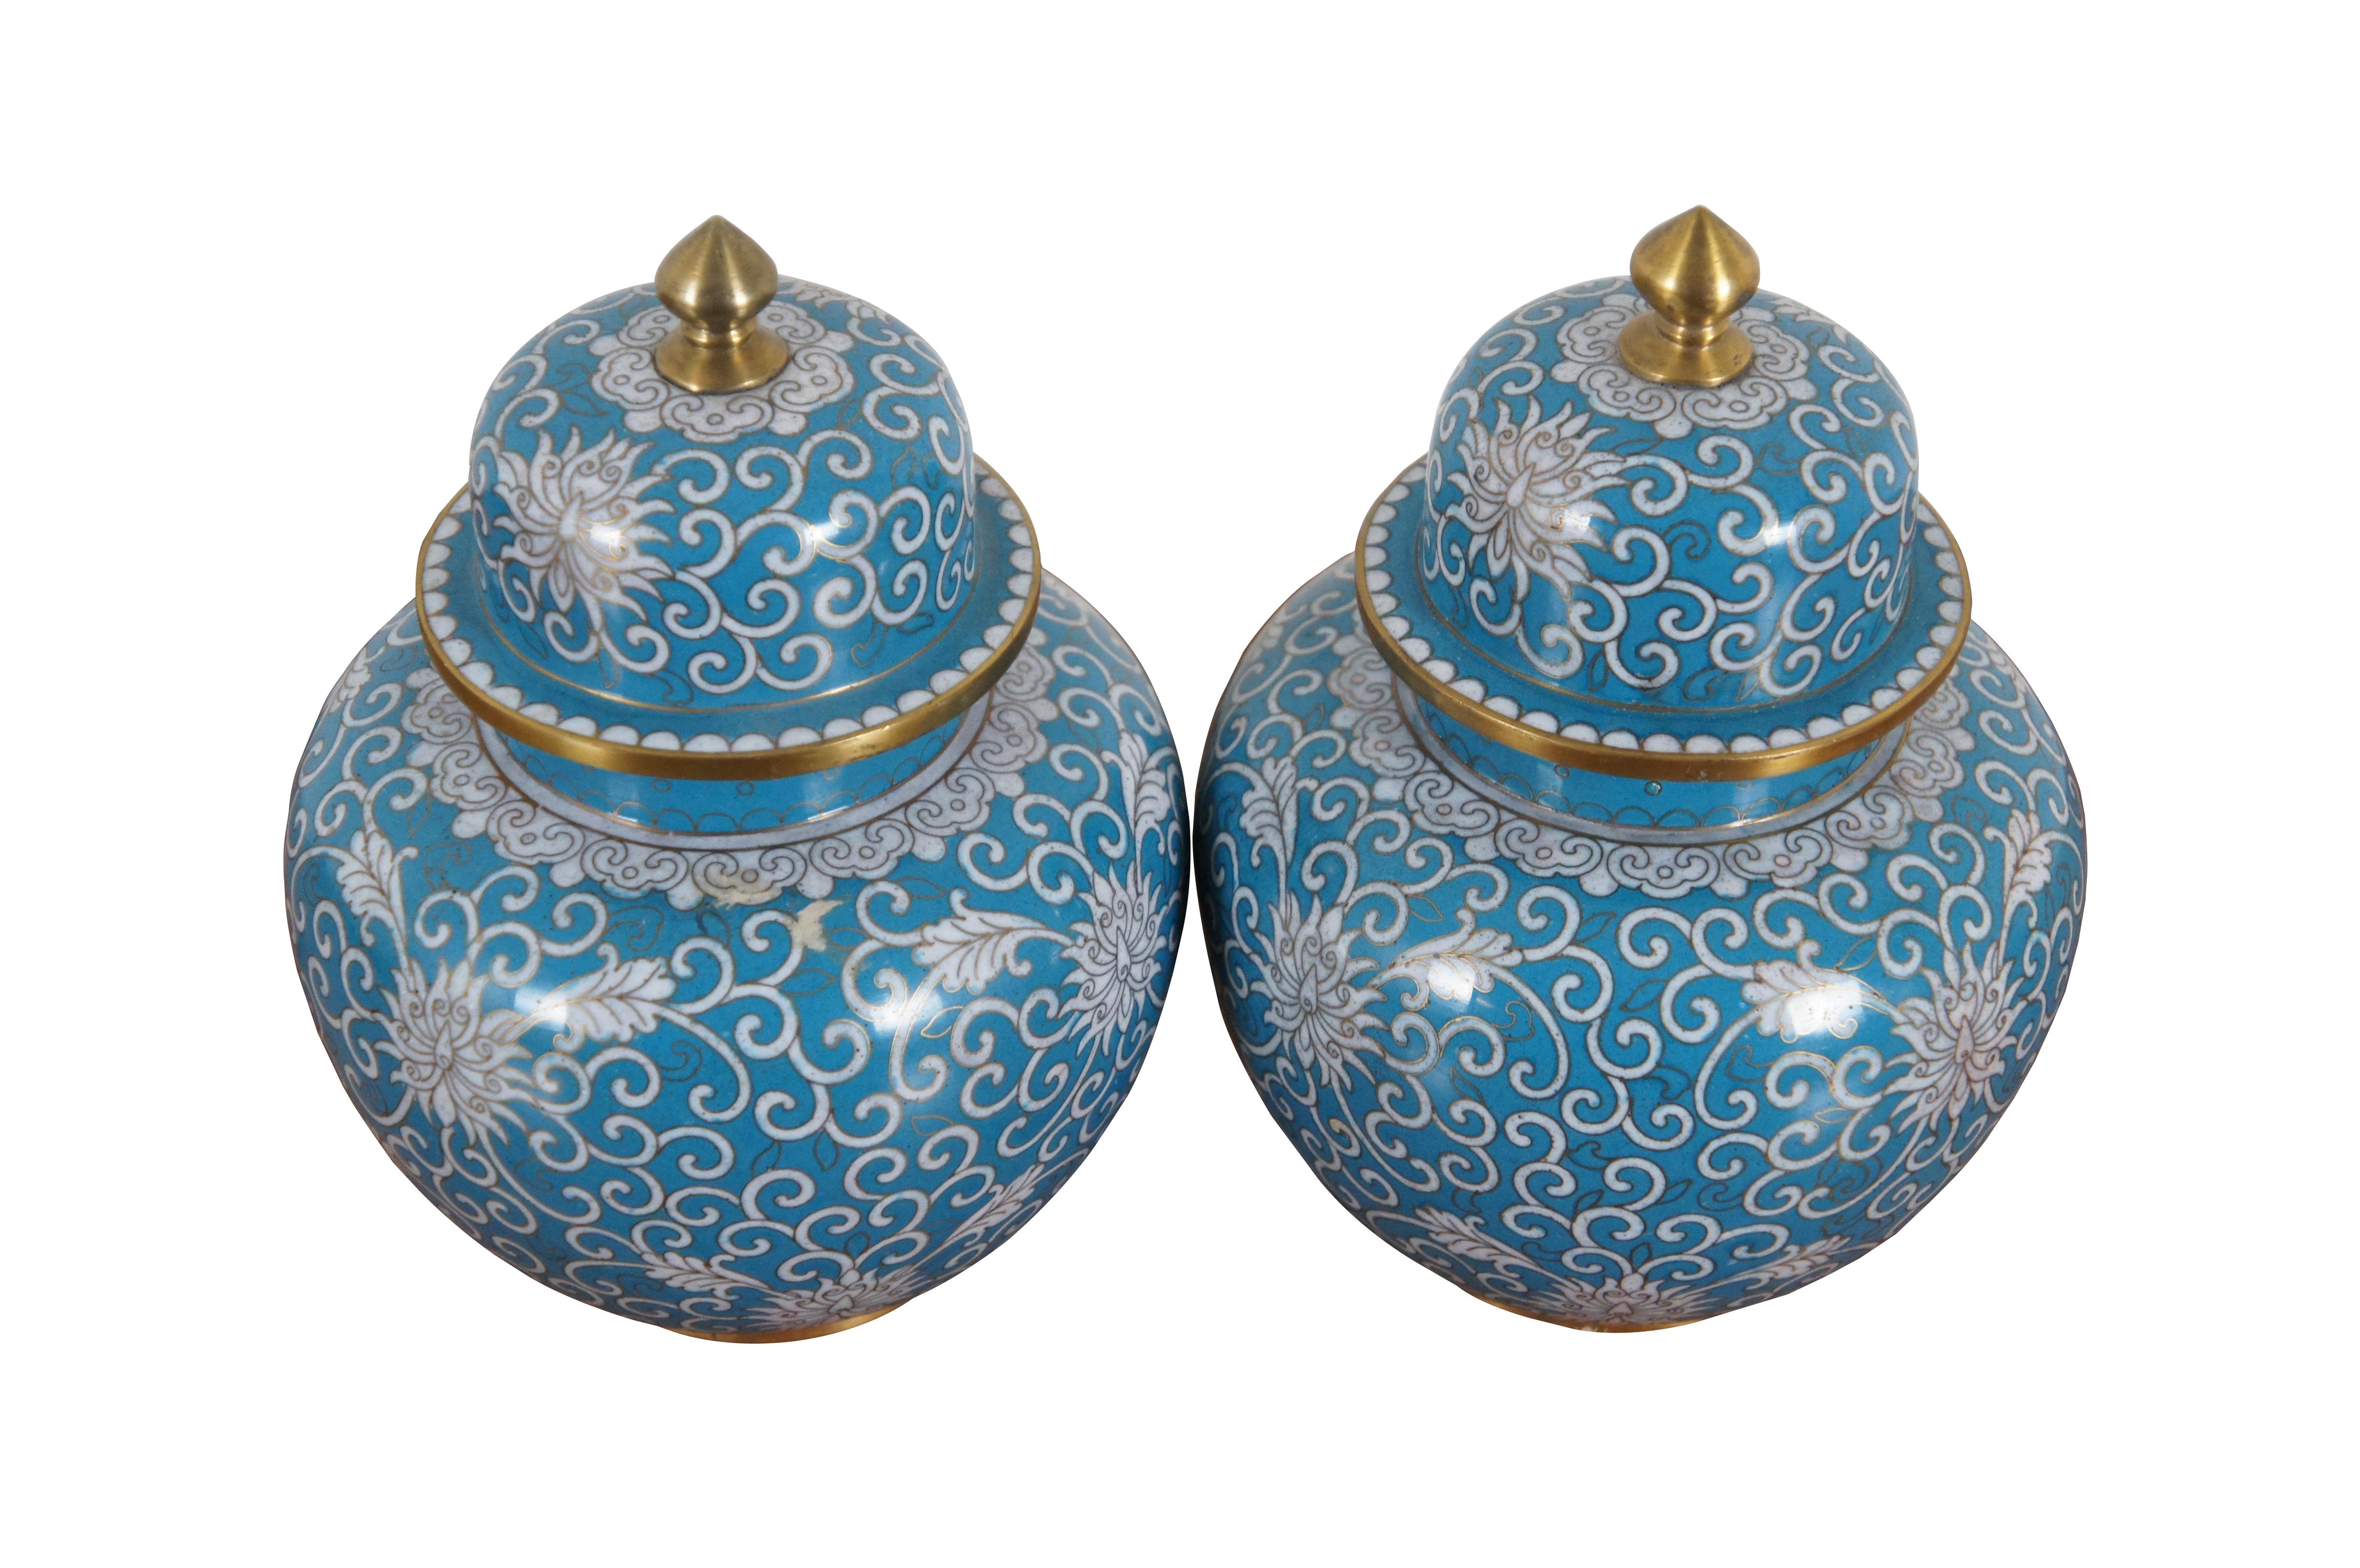 Pair of antique cloisonne ginger jars with lids featuring a design of chrysanthemums and swirling tendrils in white on a turquoise blue ground. Made in China, circa 1890-1910

Dimensions:
5.5